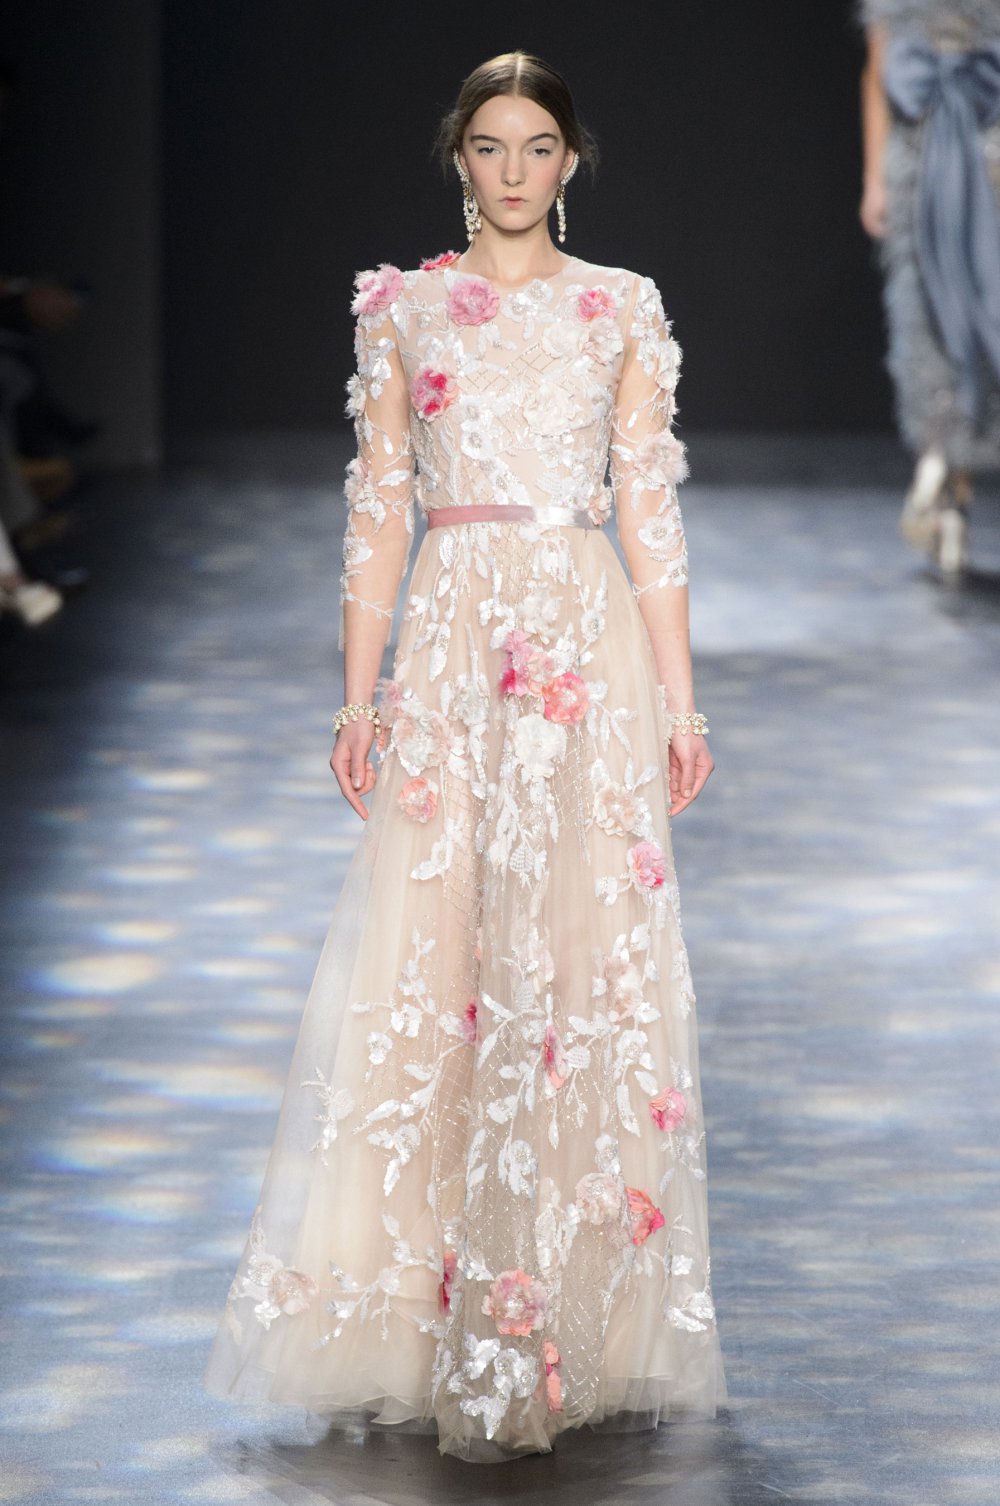 25 wedding dresses spotted at the fashion shows